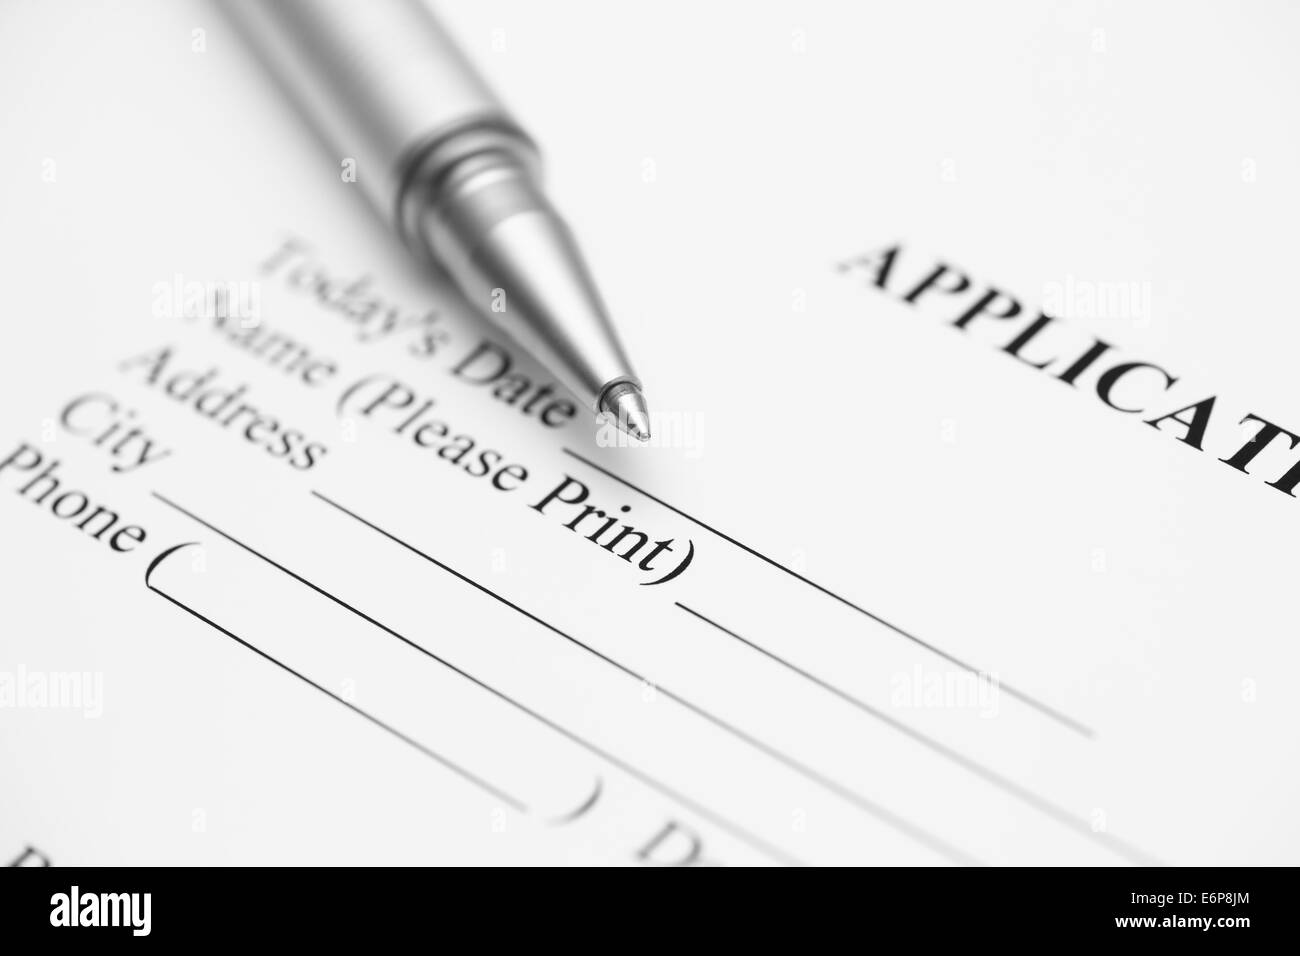 Application form and ballpoint pen. Focus on the end of ballpoint pen. Black and White. Stock Photo